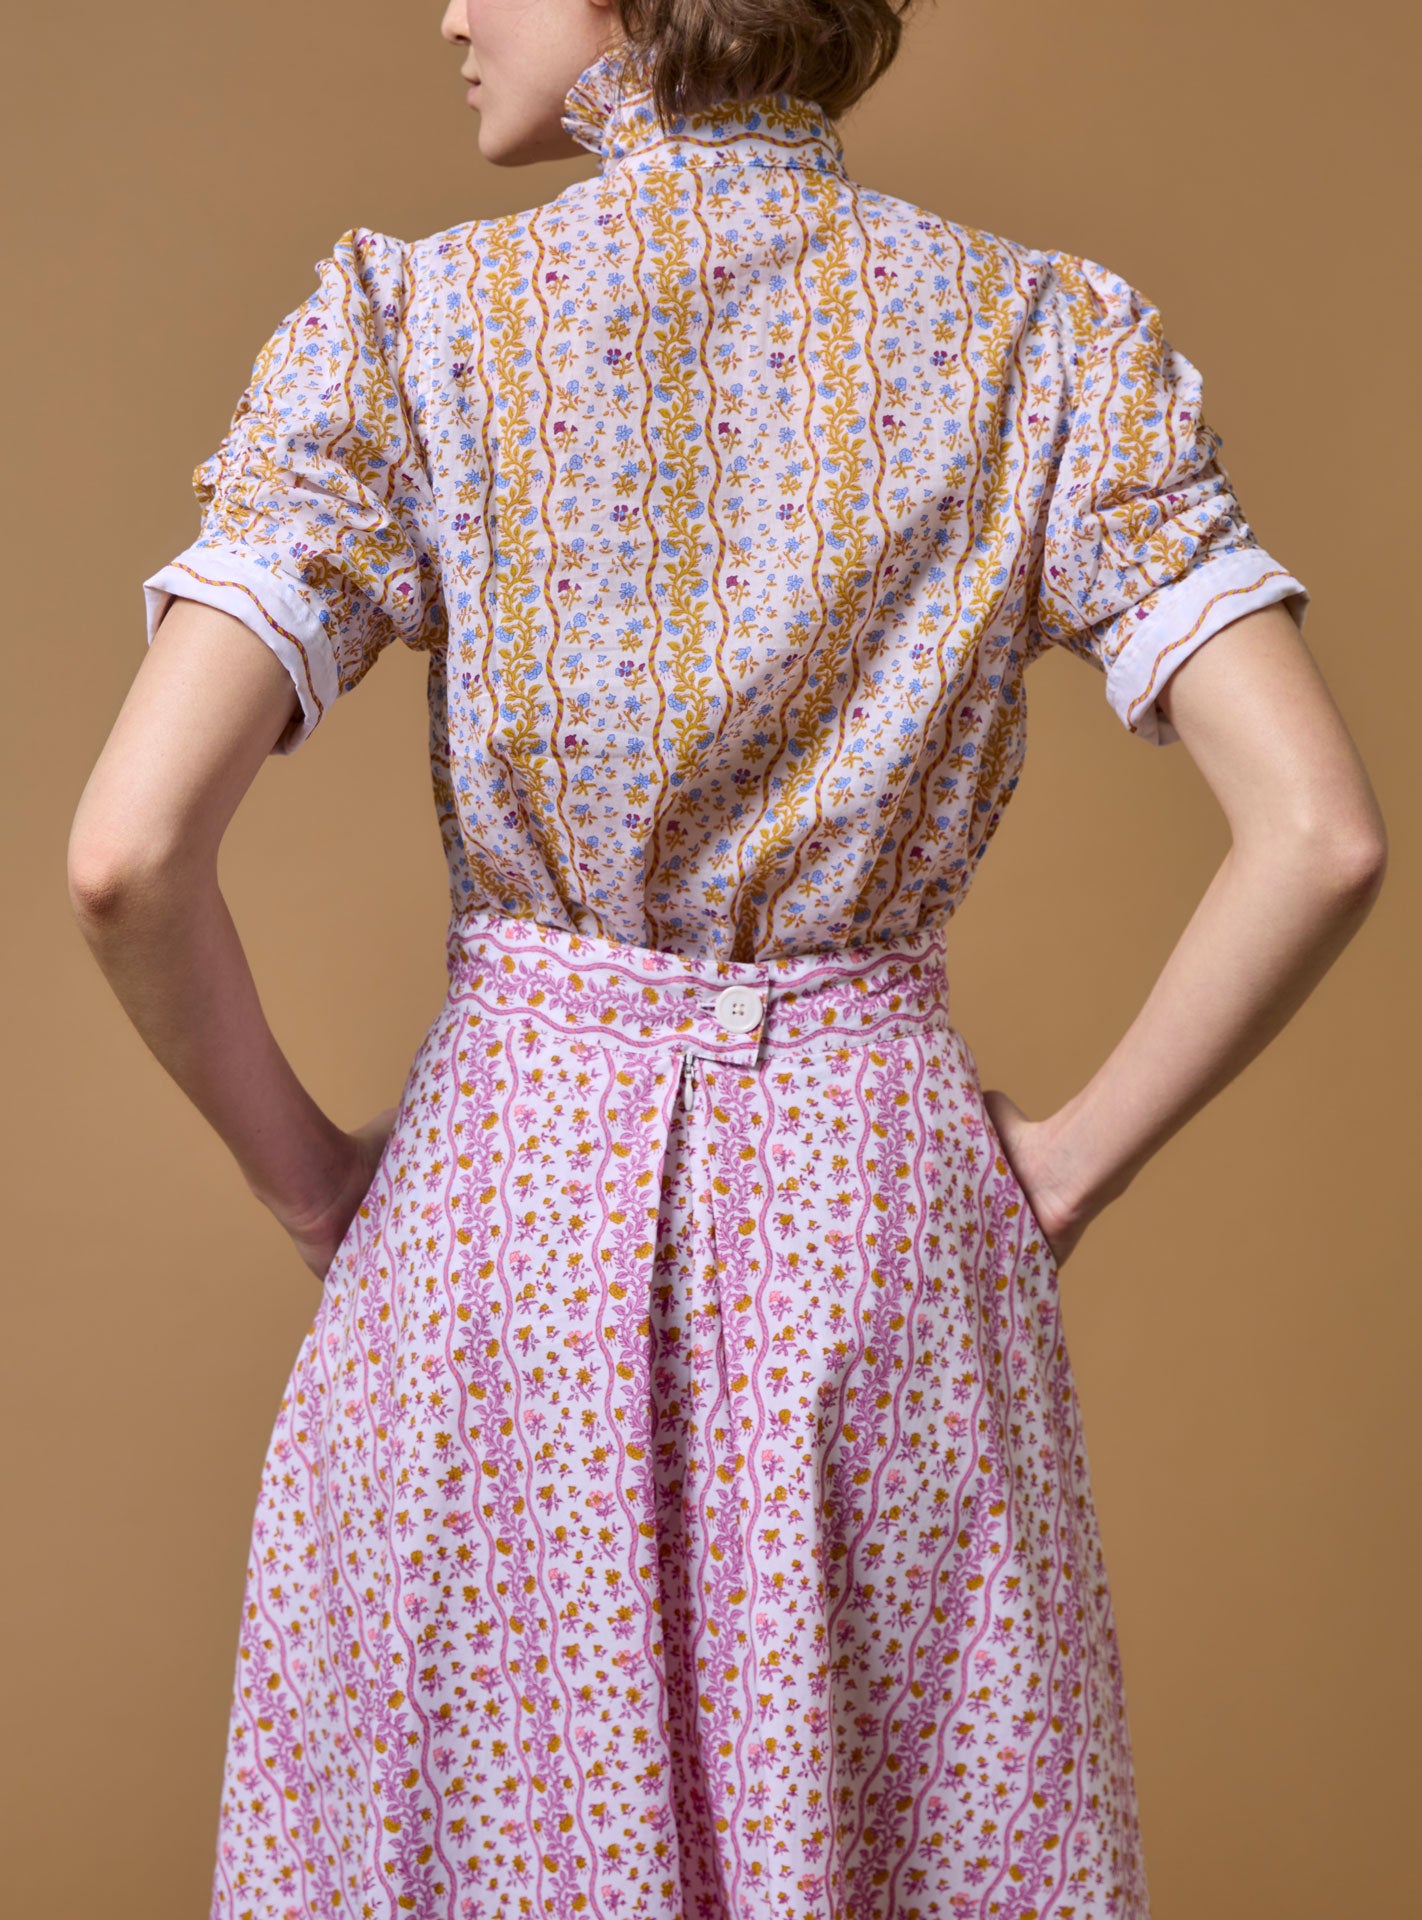 Back view of Vita Liselund Print Mustard / Bluebell Blouse by Thierry Colson